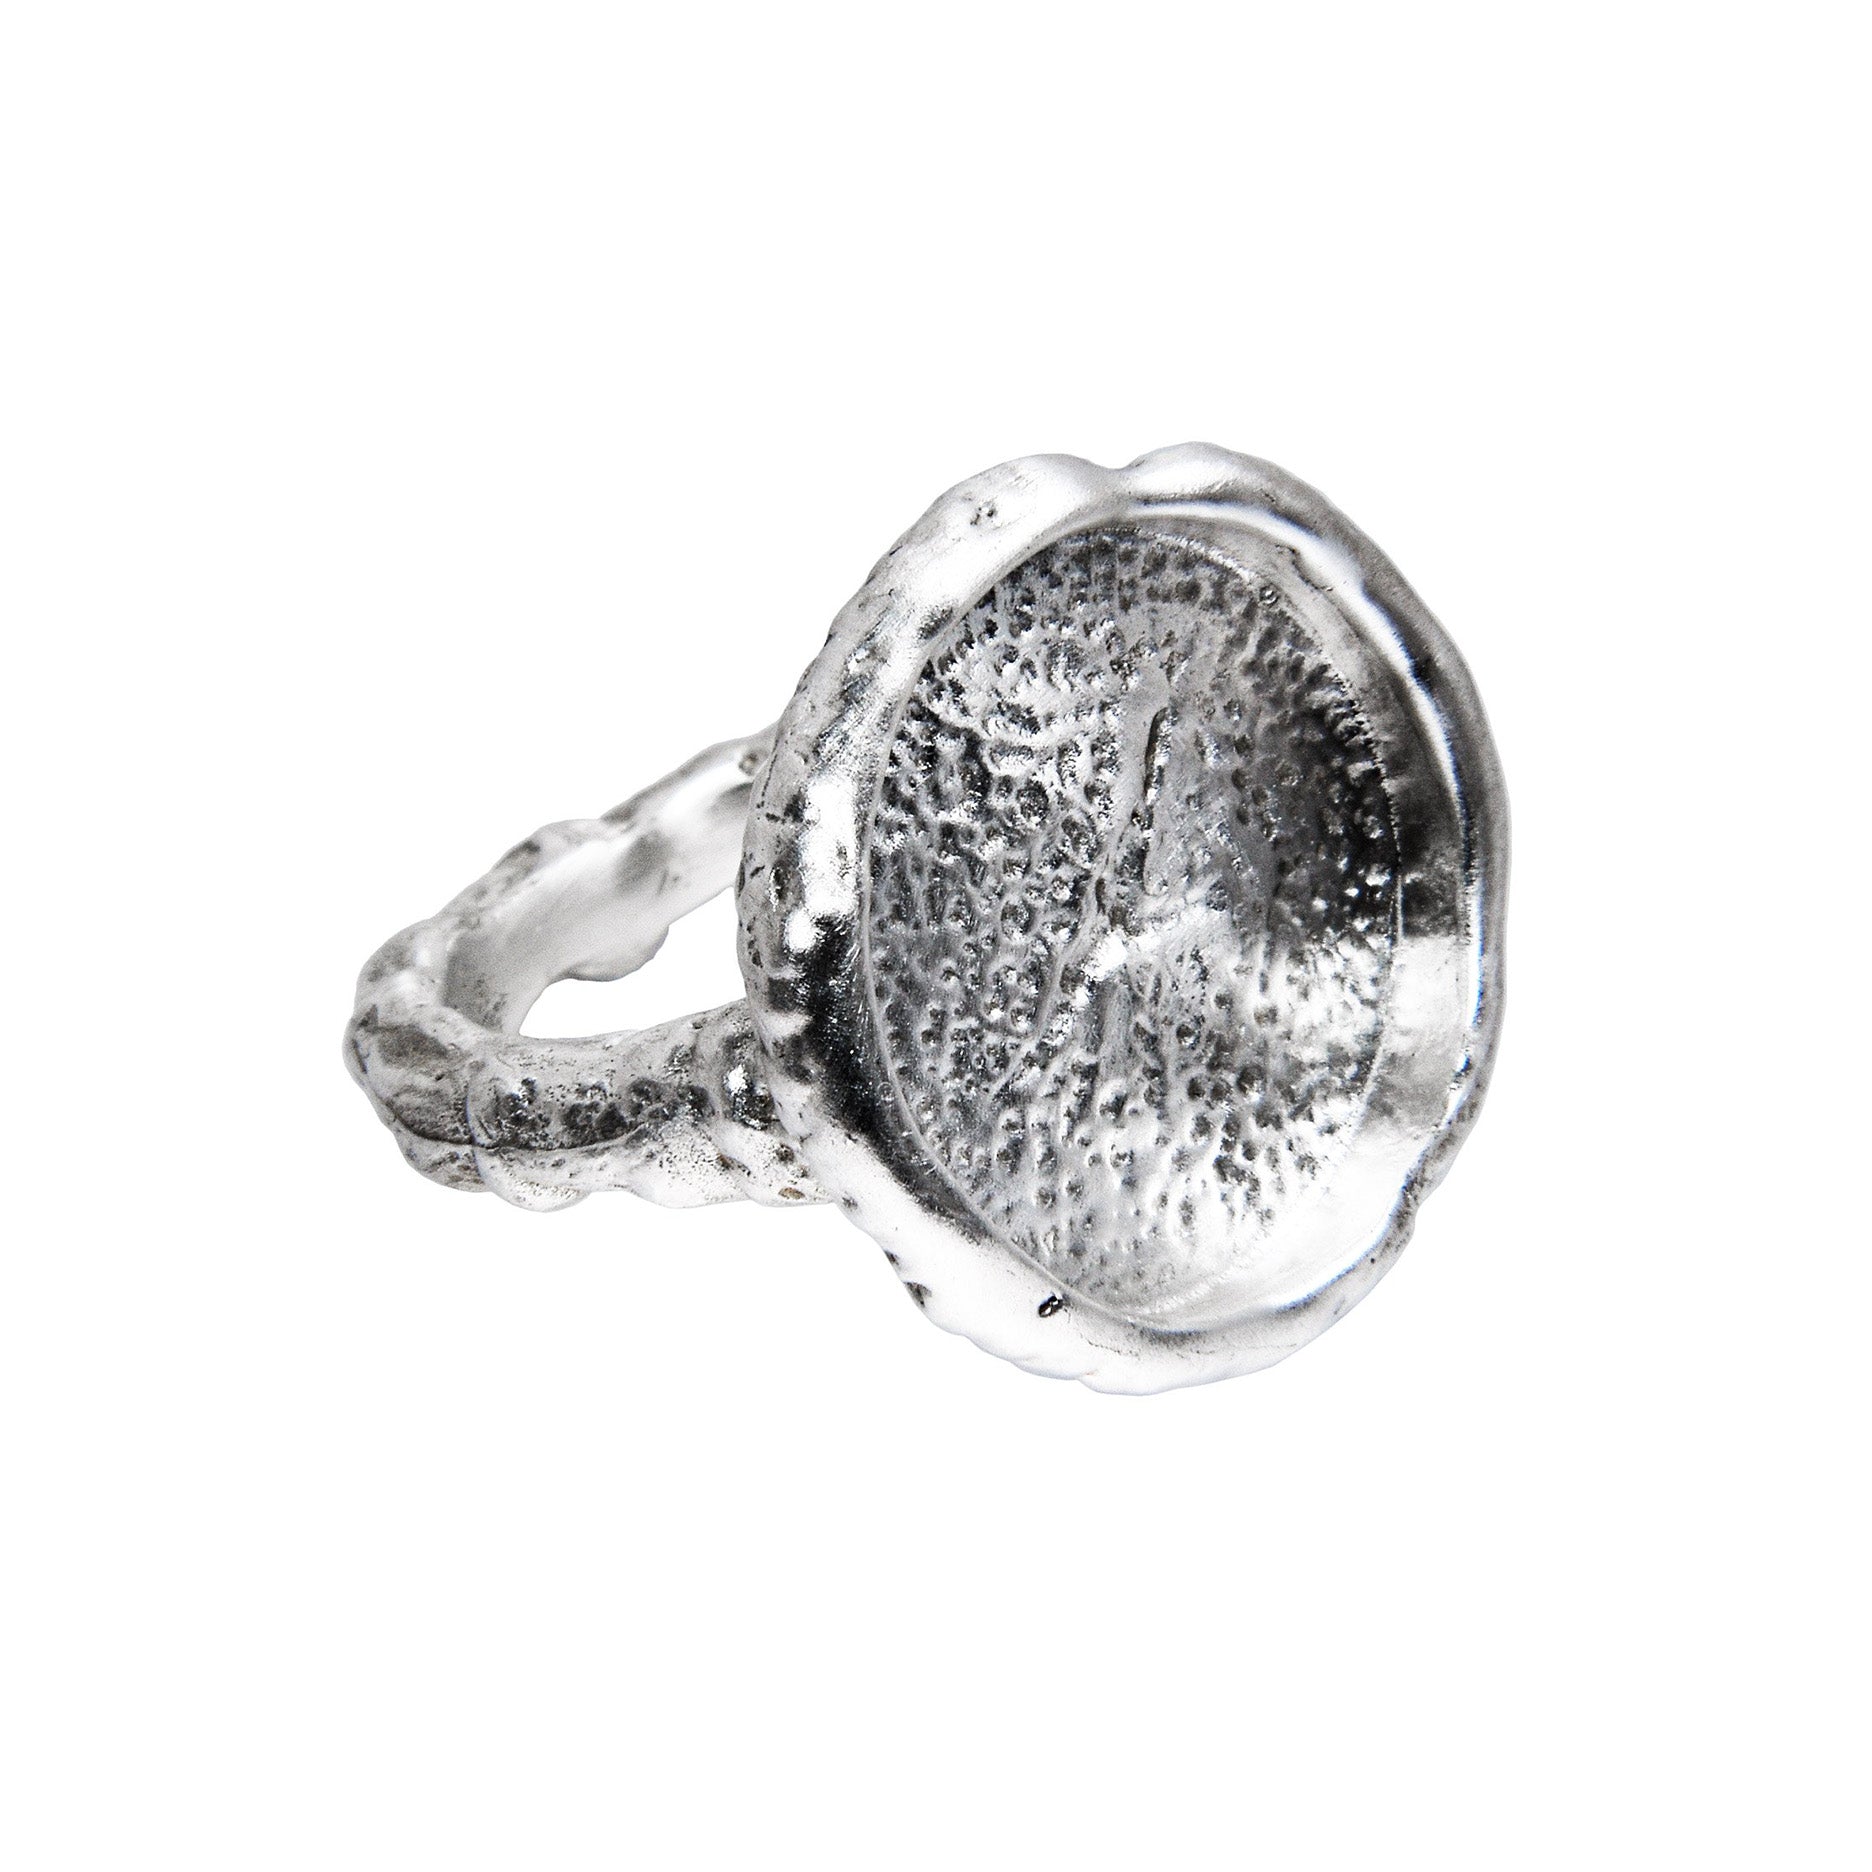 Acorn Ring - Sterling Silver - US Size 6.5